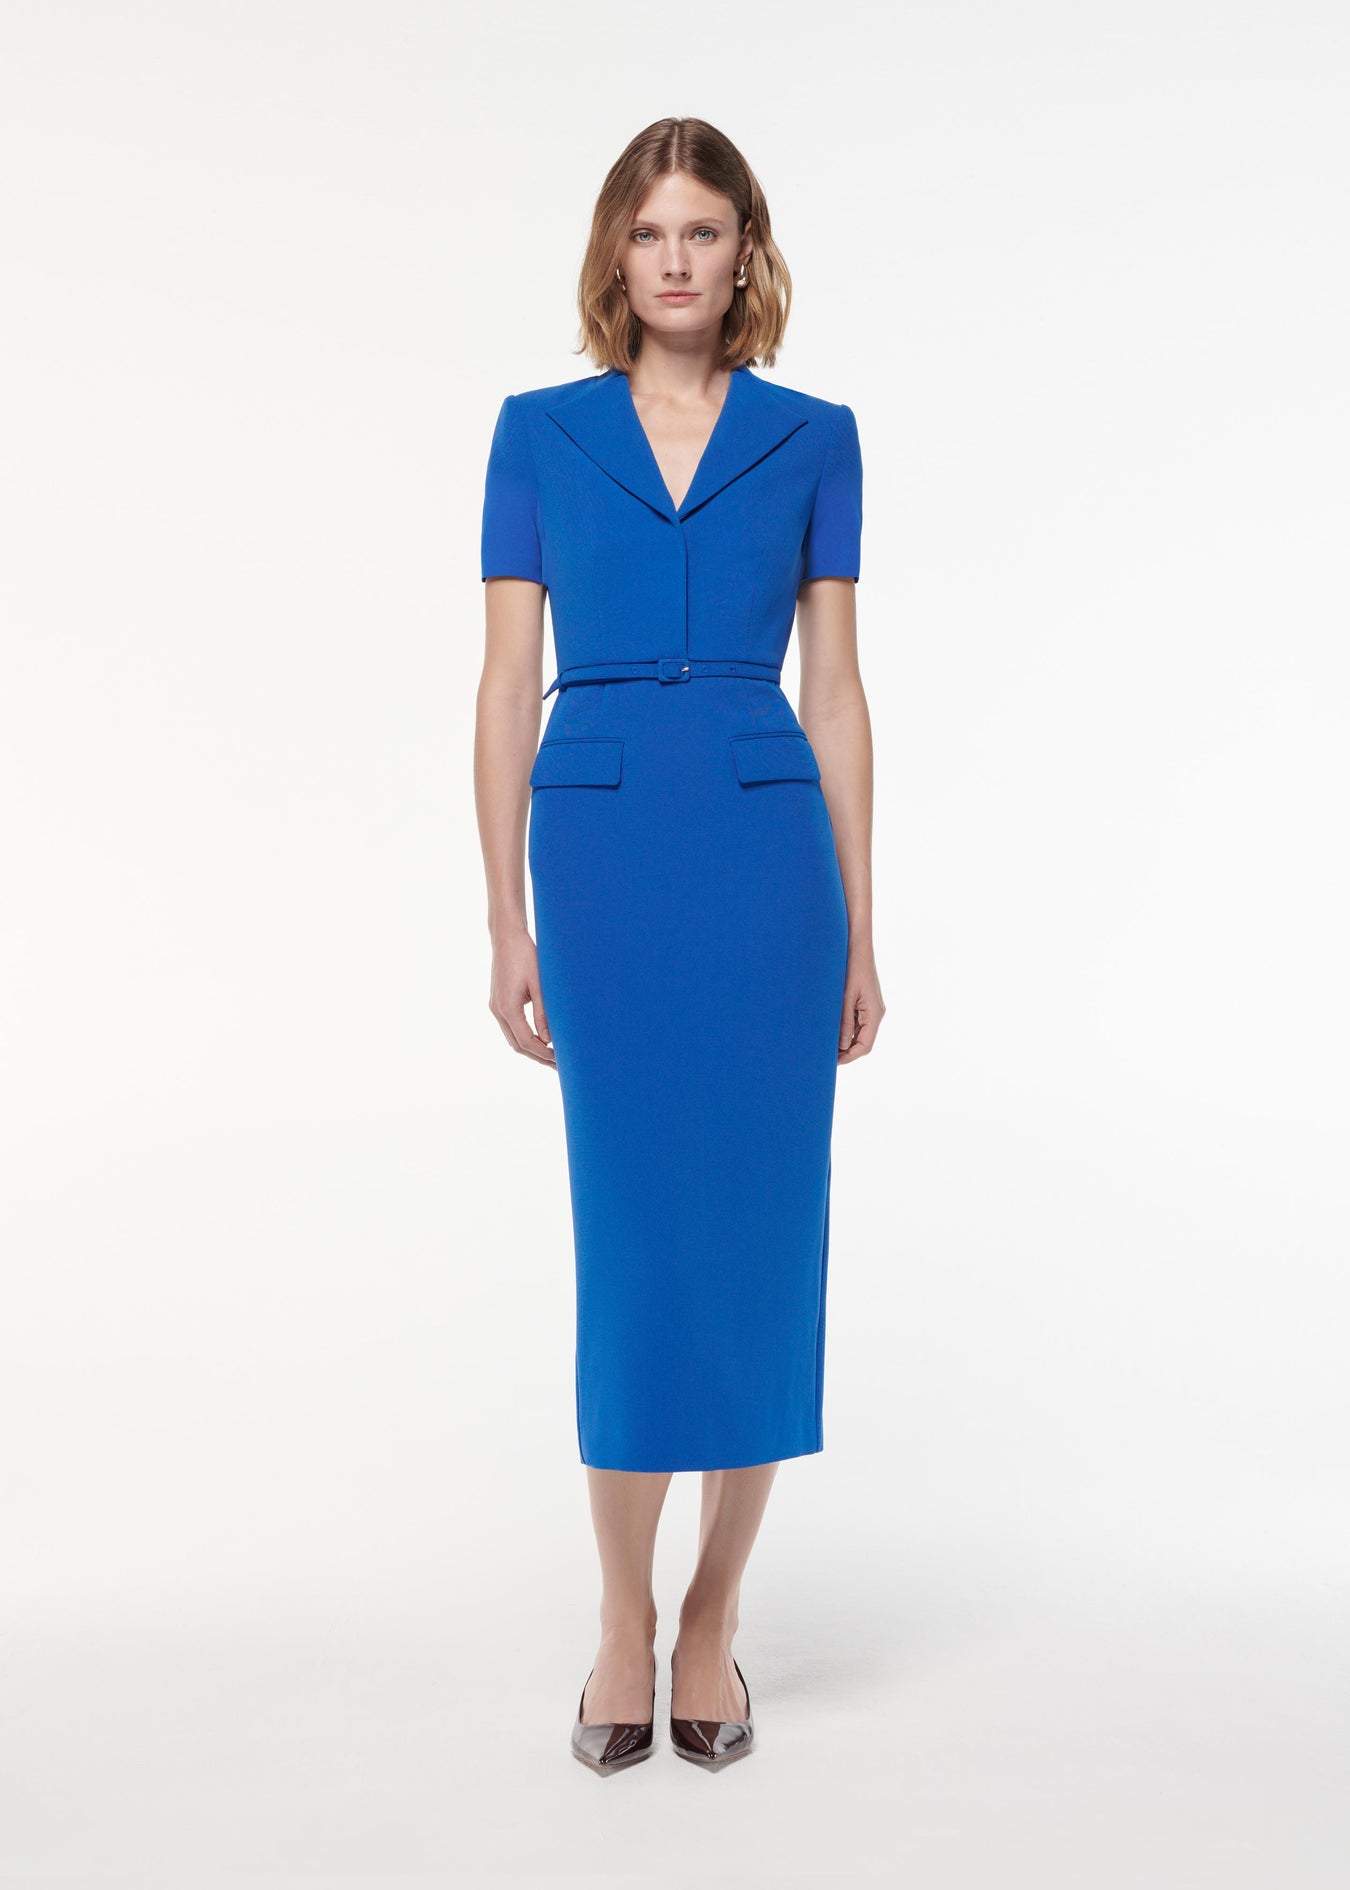 A photograph of a woman wearing a Short Sleeve Collar Heavy Cady Midi Dress in Blue